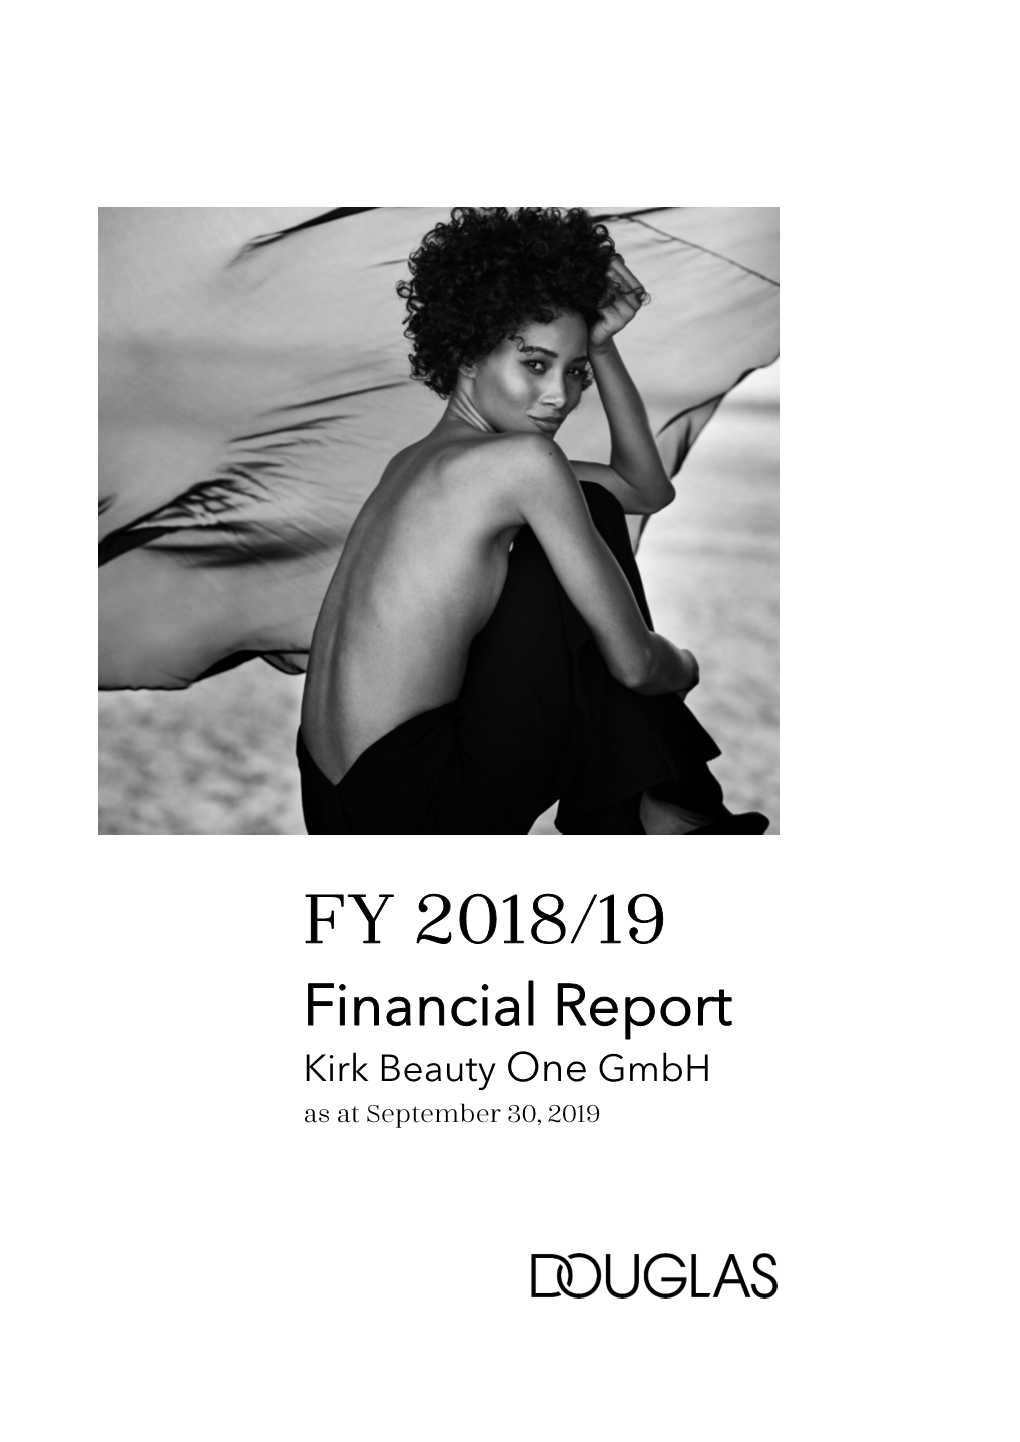 FY 2018/19 Financial Report Kirk Beauty One Gmbh As at September 30, 2019